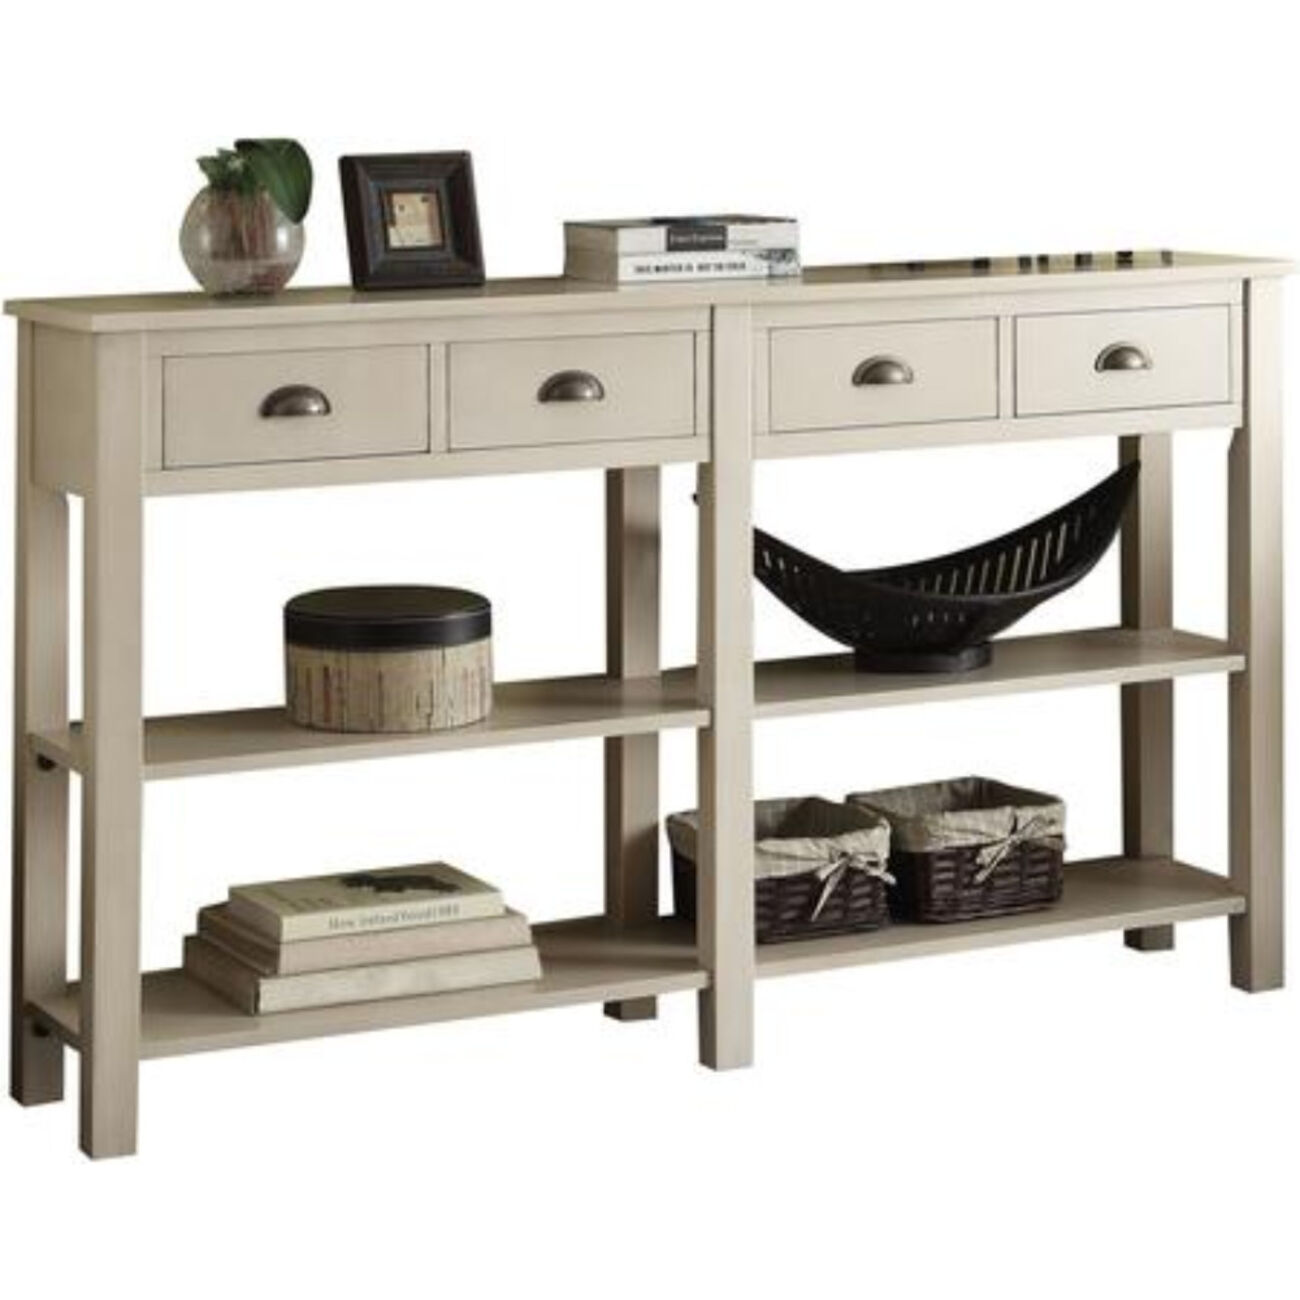 Wooden Console Table with Four Drawers and Two Shelves, Cream